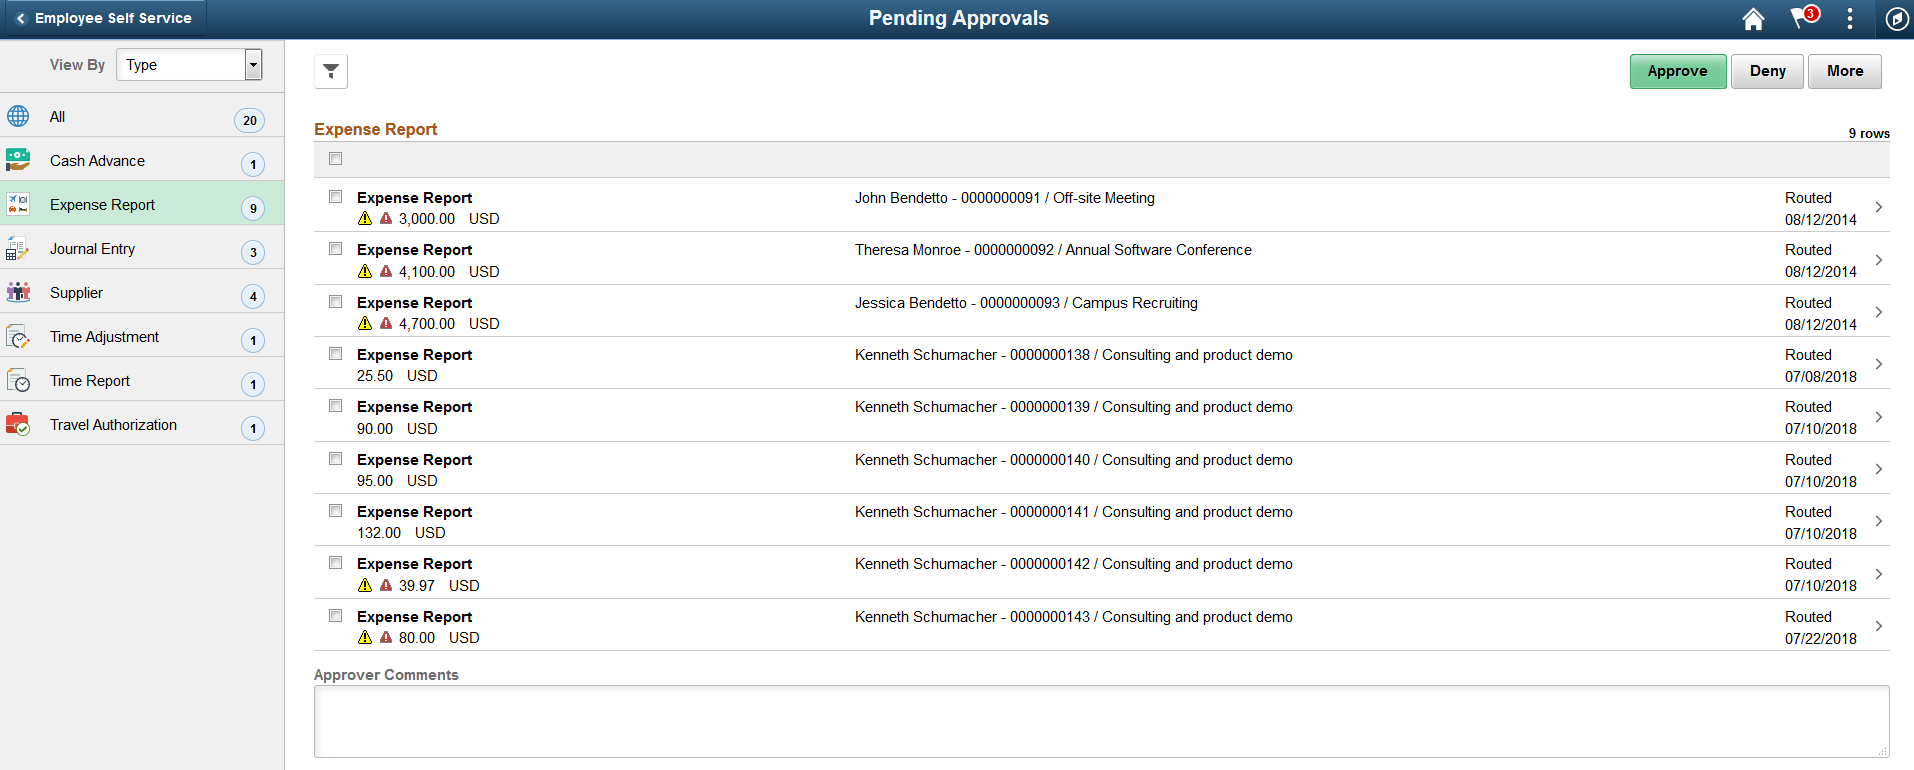 Pending Approvals - Expense Report list page